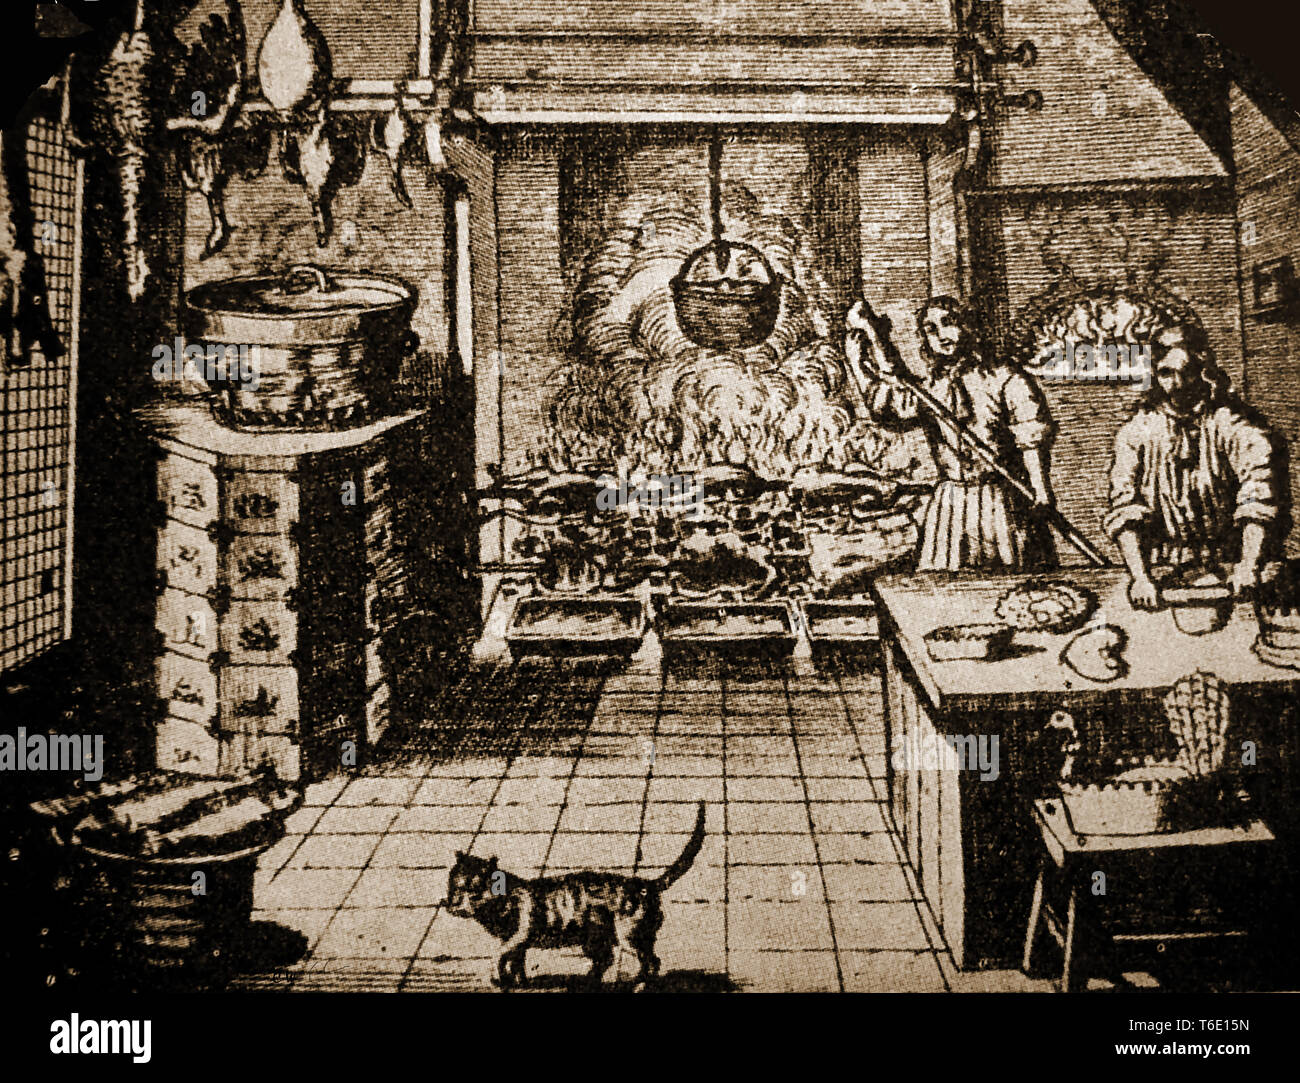 An engraving of a 17th century kitchen scene in a large upper class household with bakers,cook and  hogs on roasting on a spit and bread dough proving near the fire. Stock Photo